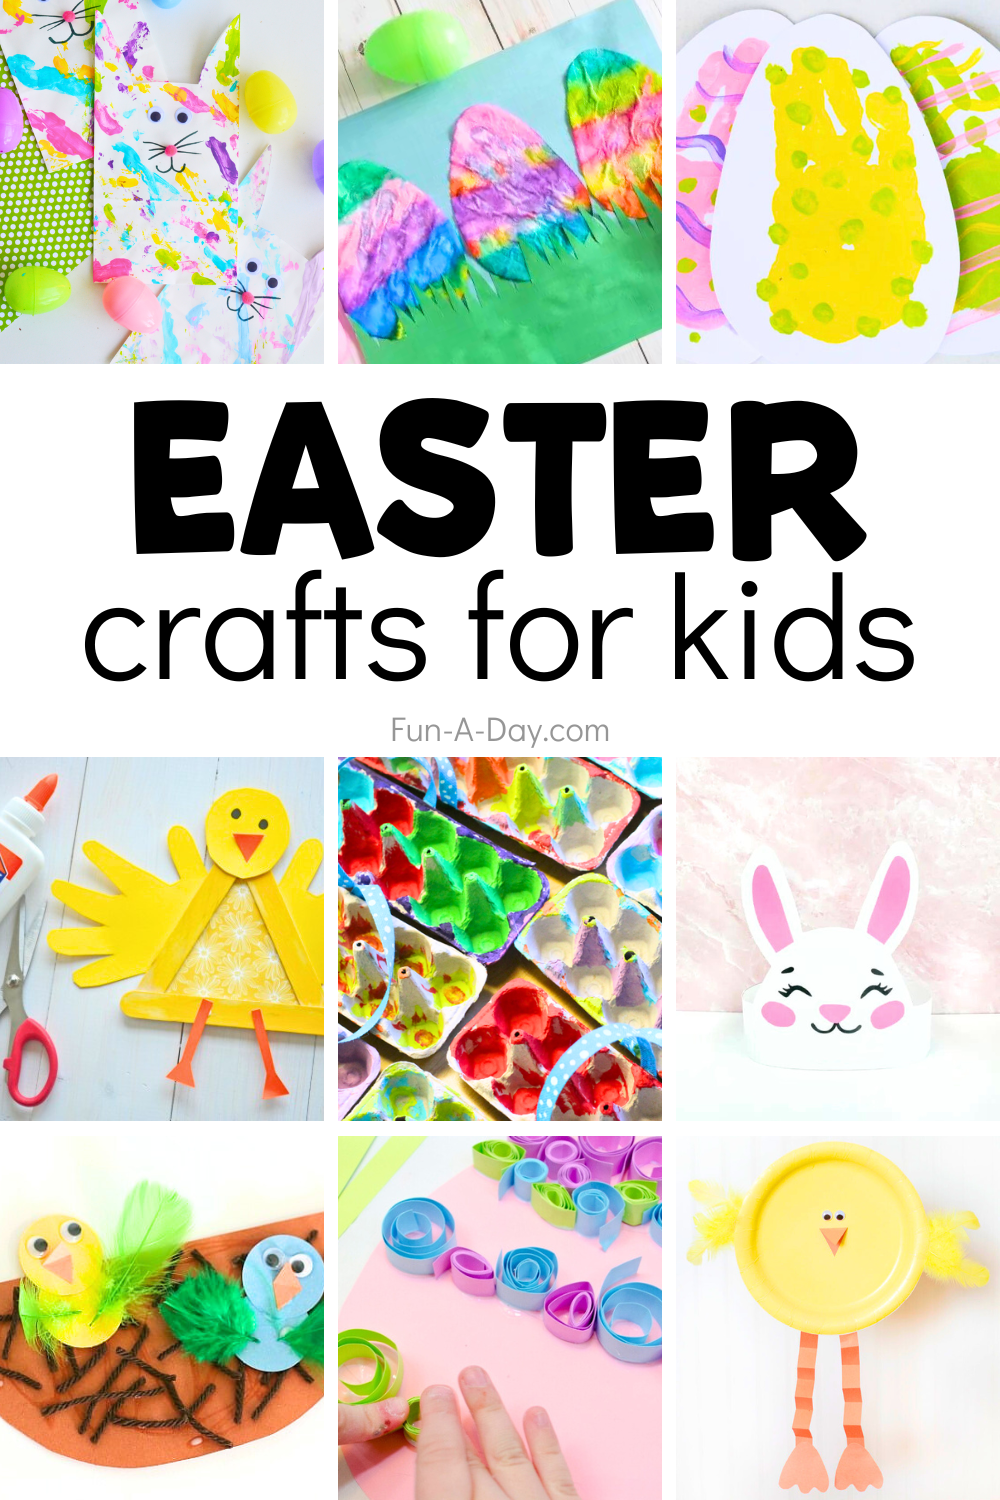 Nine Easter craft ideas with text that reads Easter crafts for kids.